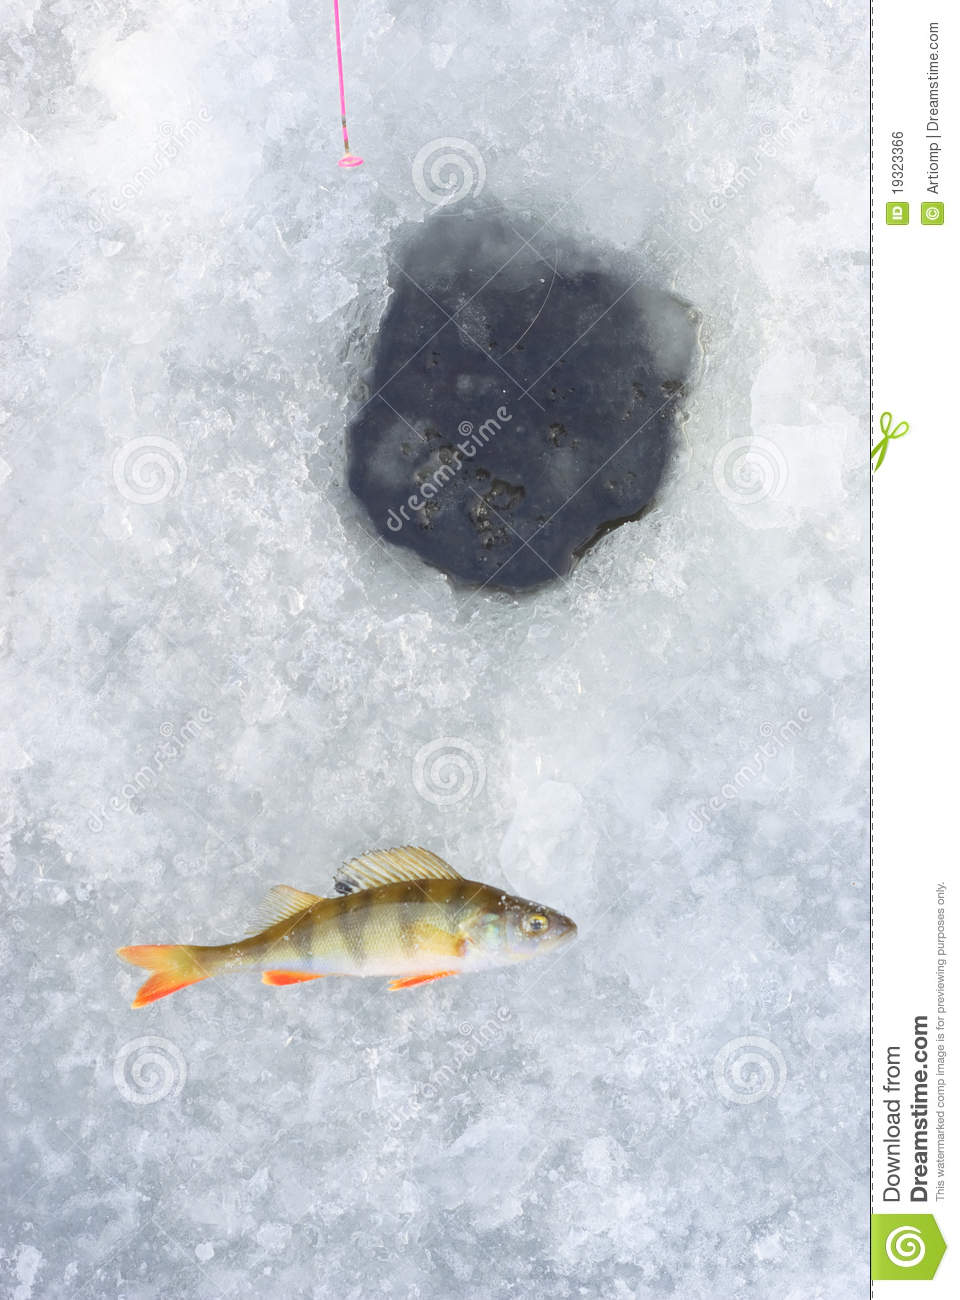 Ice Hole And Perch Fish Royalty Free Stock Image   Image  19323366